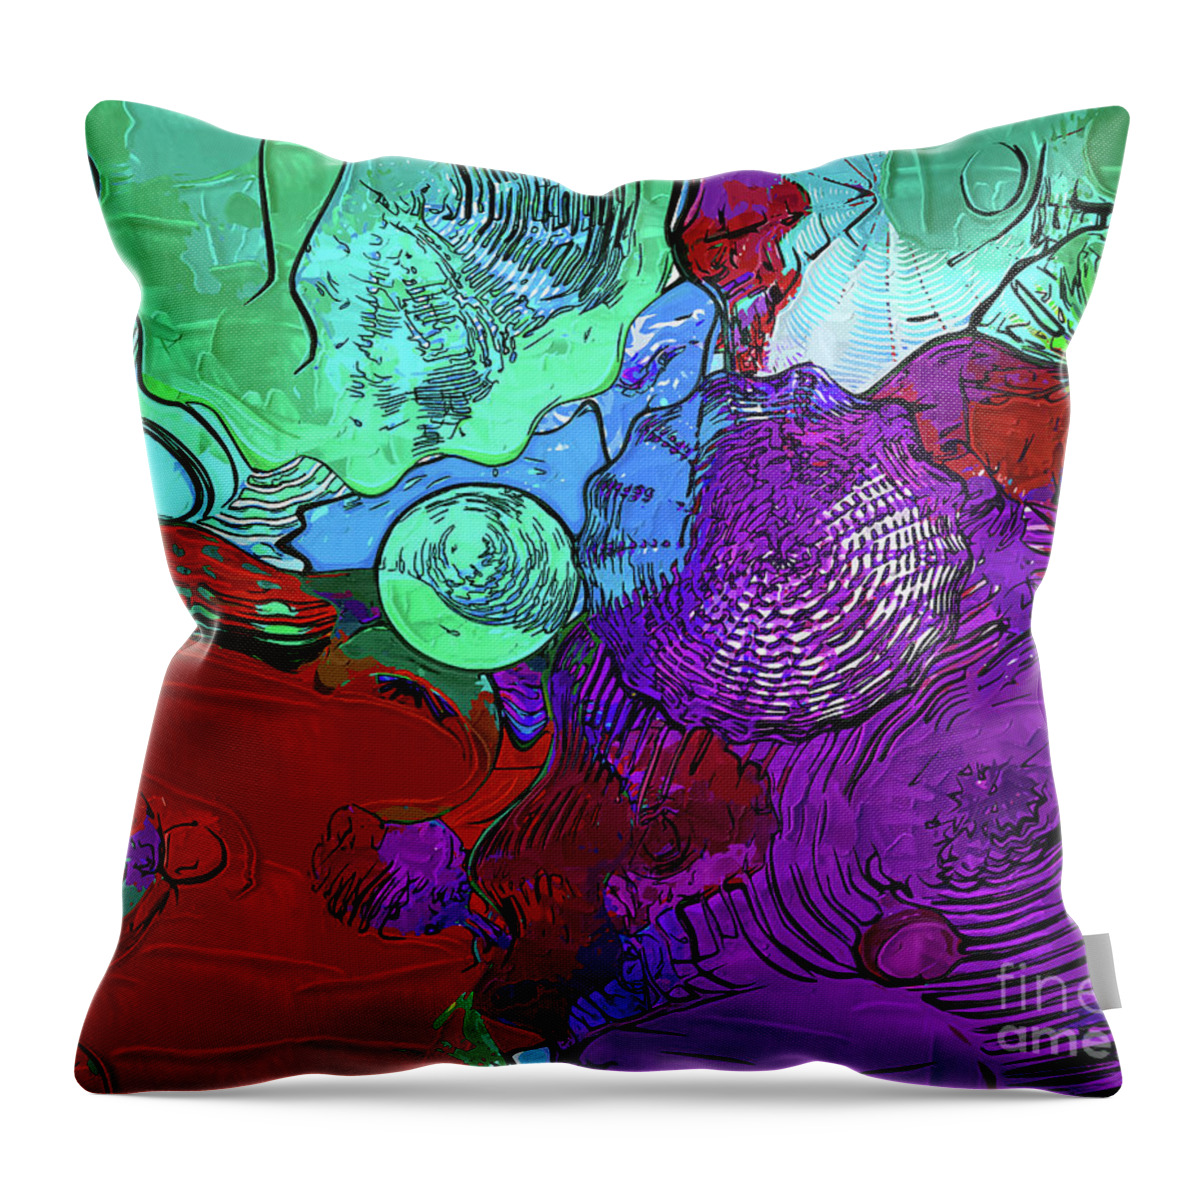 Abstract-art Throw Pillow featuring the digital art Purple Red Floral by Kirt Tisdale